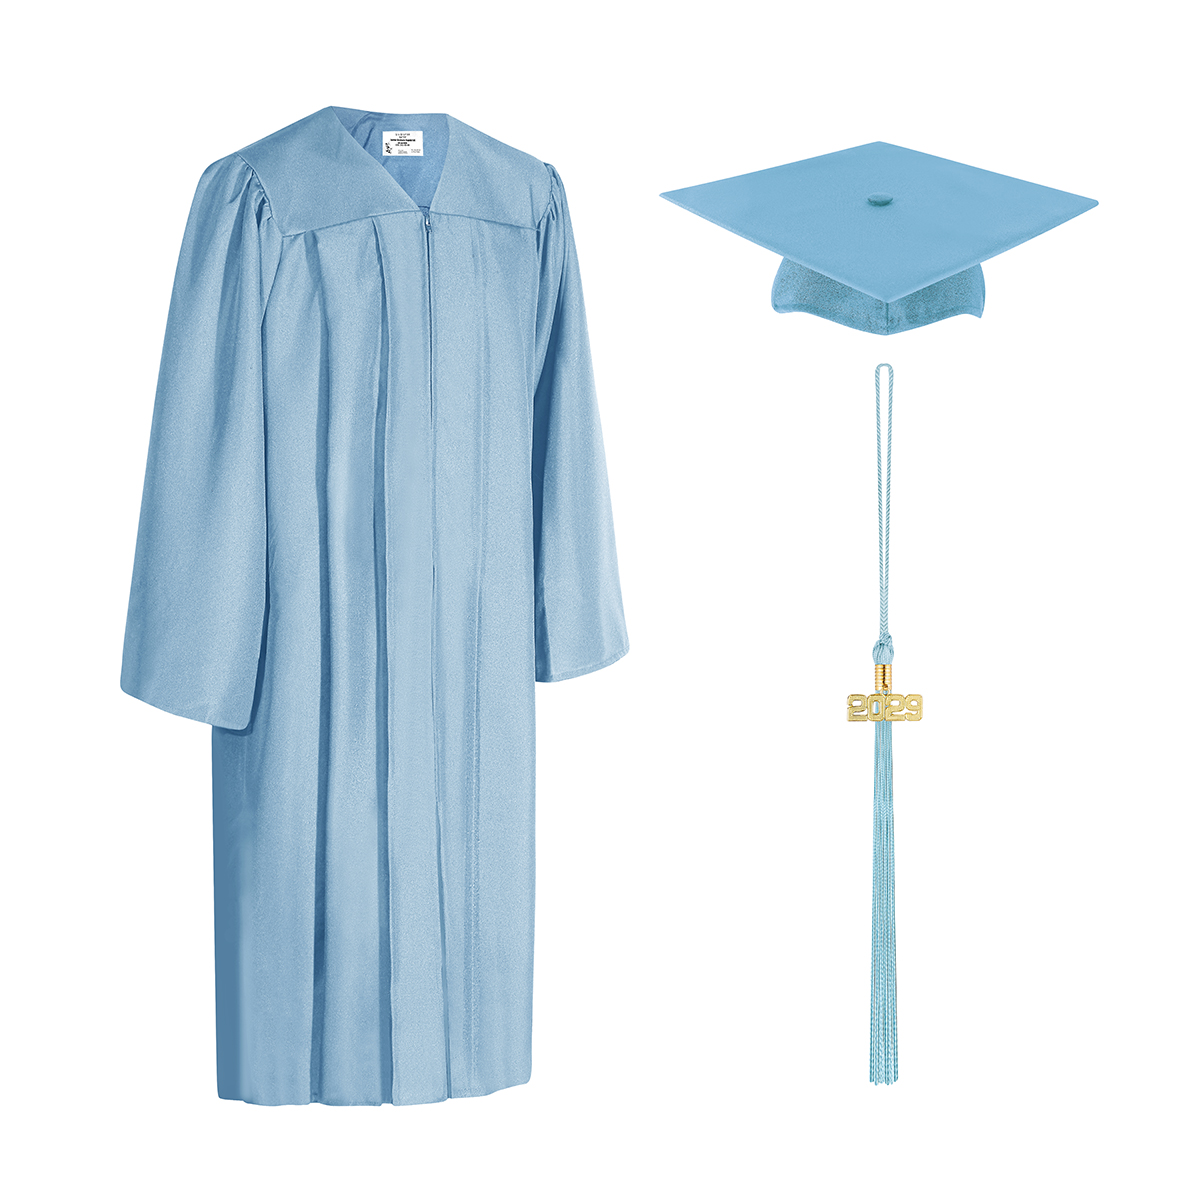 Graduation Gowns, Mortarboards, Tassels, Sashes & Supplies